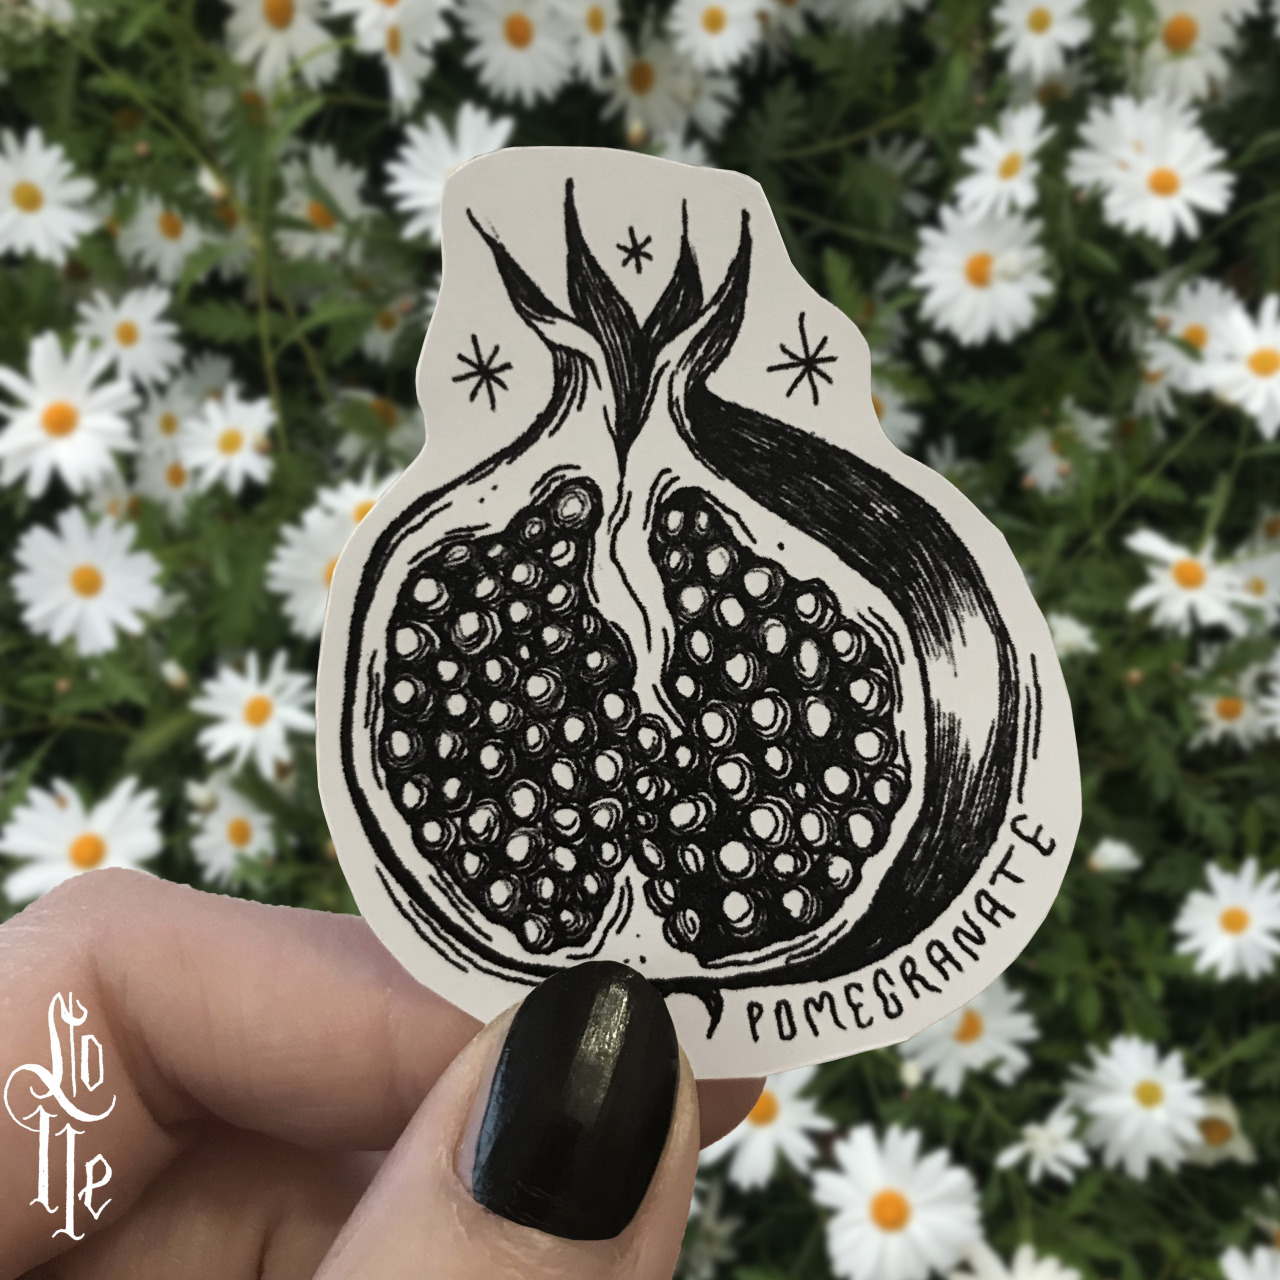 ✧  Take a look at the new Herbarium stickers set 🌱 now available on my shop || 👉🏻 tap to shop 🌿 🌙✨✶ each pack includes 11 original botanical themed illustrations, digitally printed (ink-jet) on high quality auto-adhesive paper ♡ I think these stickers are perfect to enrich your own Herbs grimoire or to decorate a recipes book 👌🏻🪴 ✨
- - - 
👉🏻 you can also find the same illustrations available as art prints and postcards set 🍃 || Herbarium ©Lolle (2022) #stickets#stickers set#herbarium#herbary#herbology#magical herbs#herbs#plants#botanical#nature#illustration#ink illustration#botanical illustration#art prints#postcards#LOLL3shop#lOll3#original art